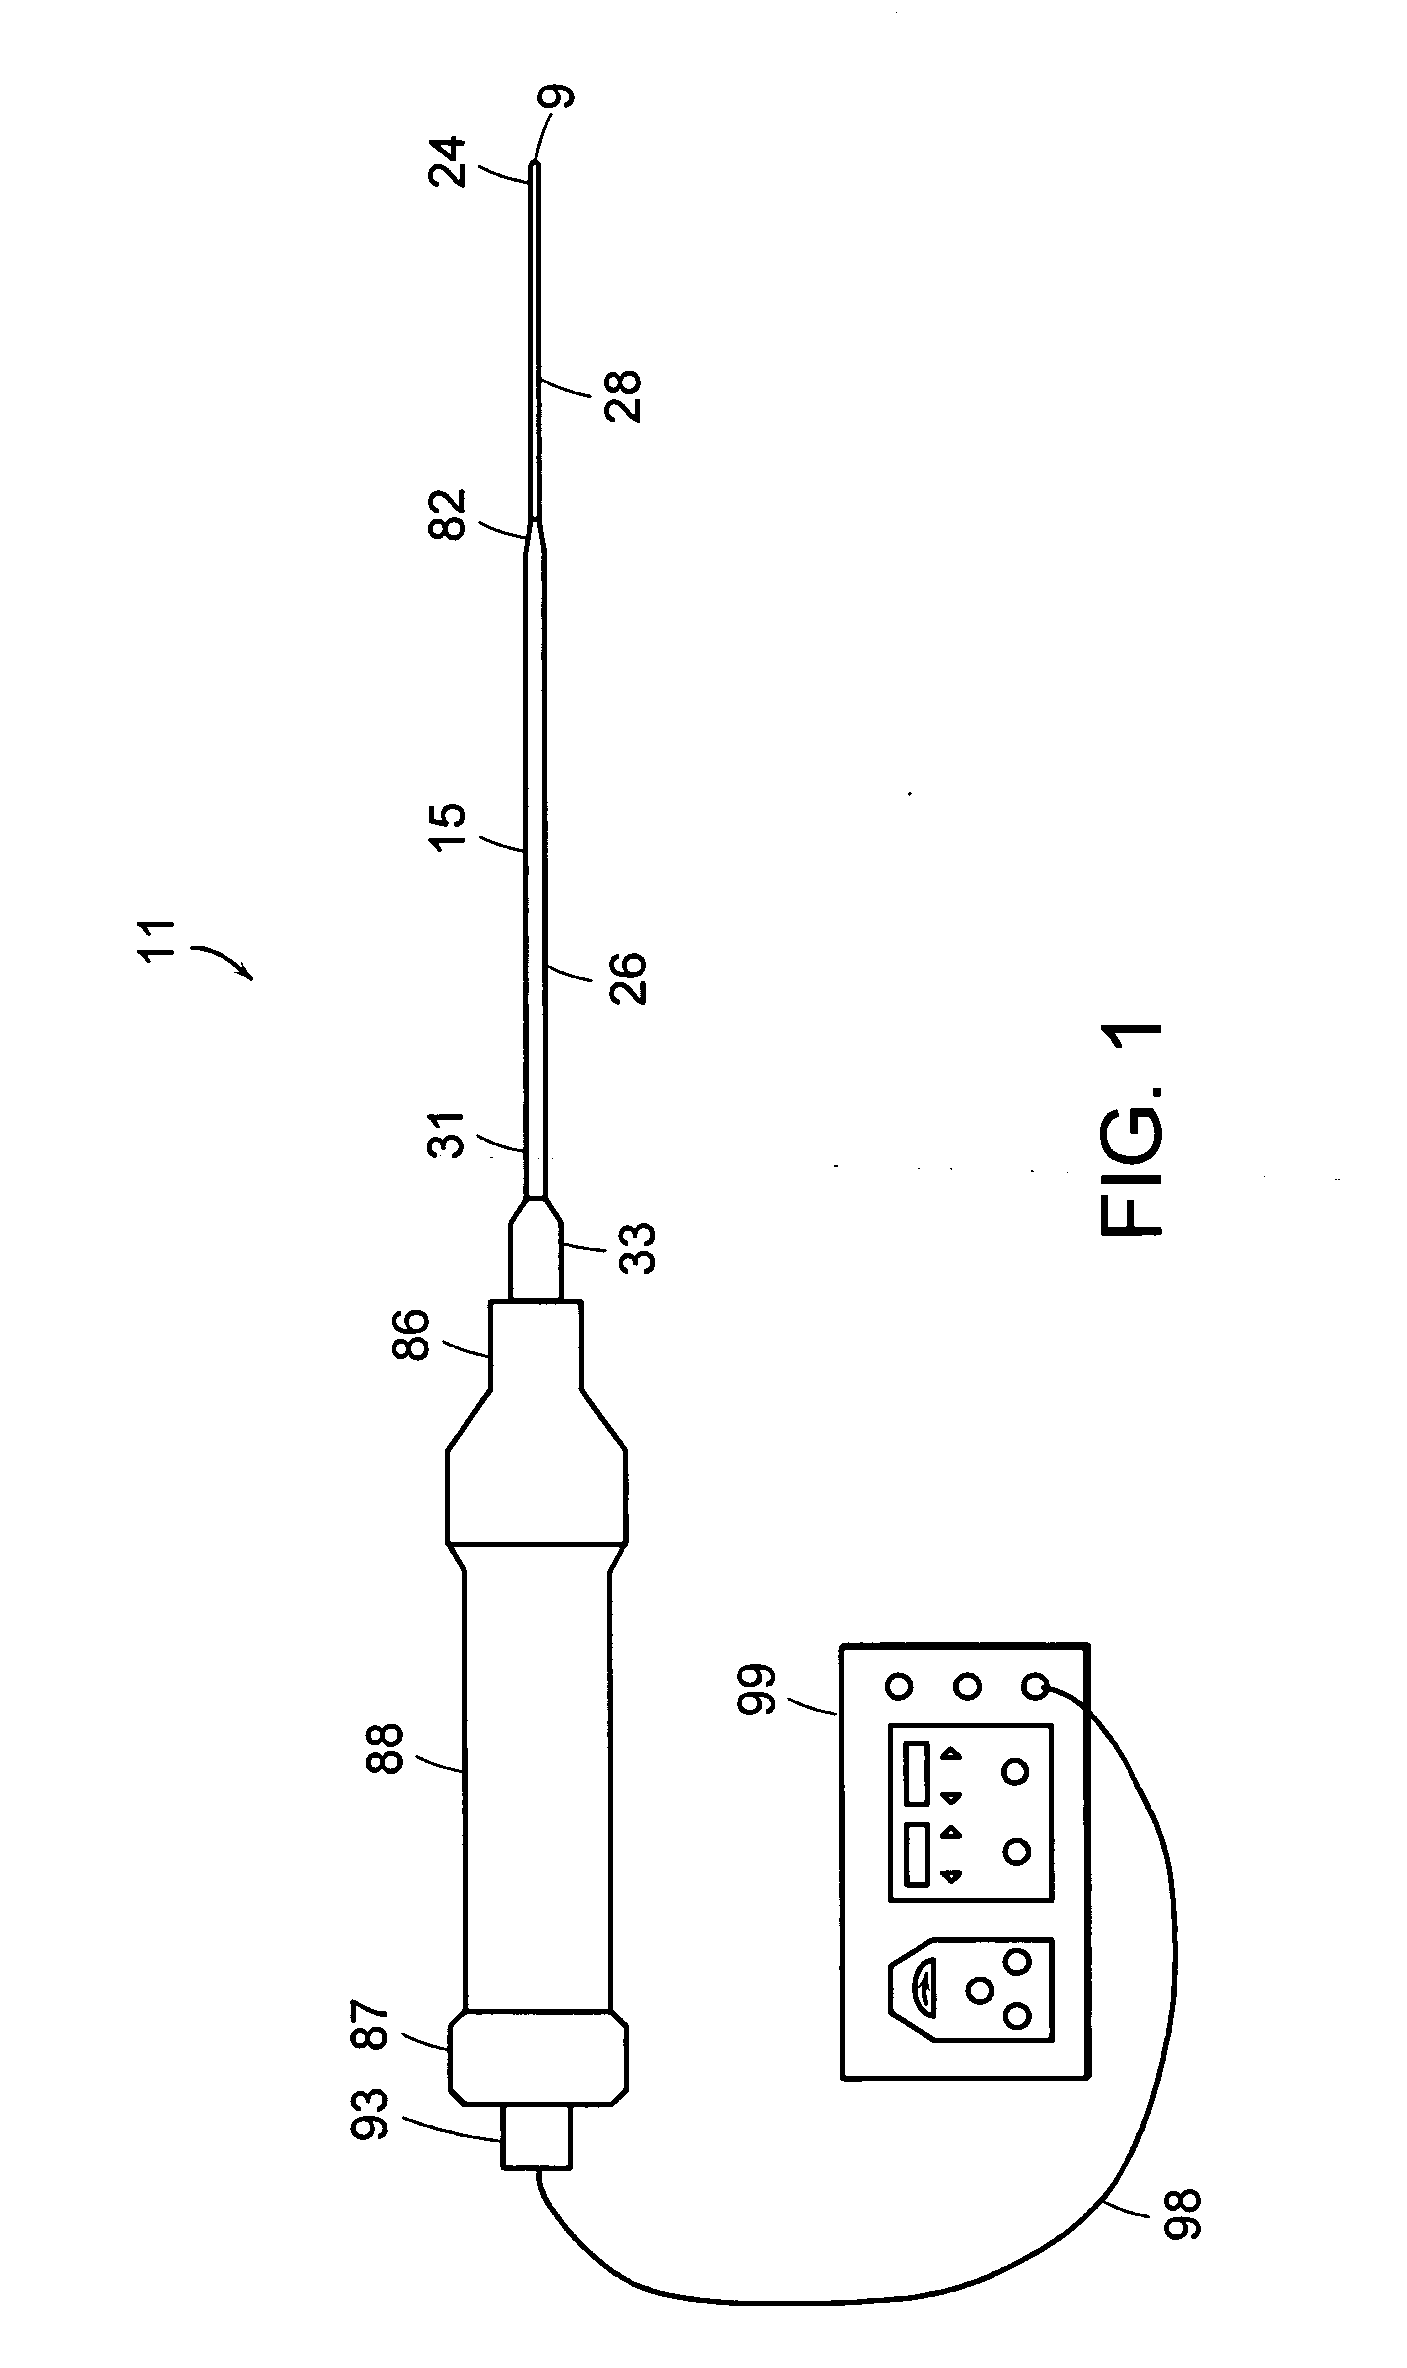 Apparatus and method for an ultrasonic medical device operating in torsional and transverse modes